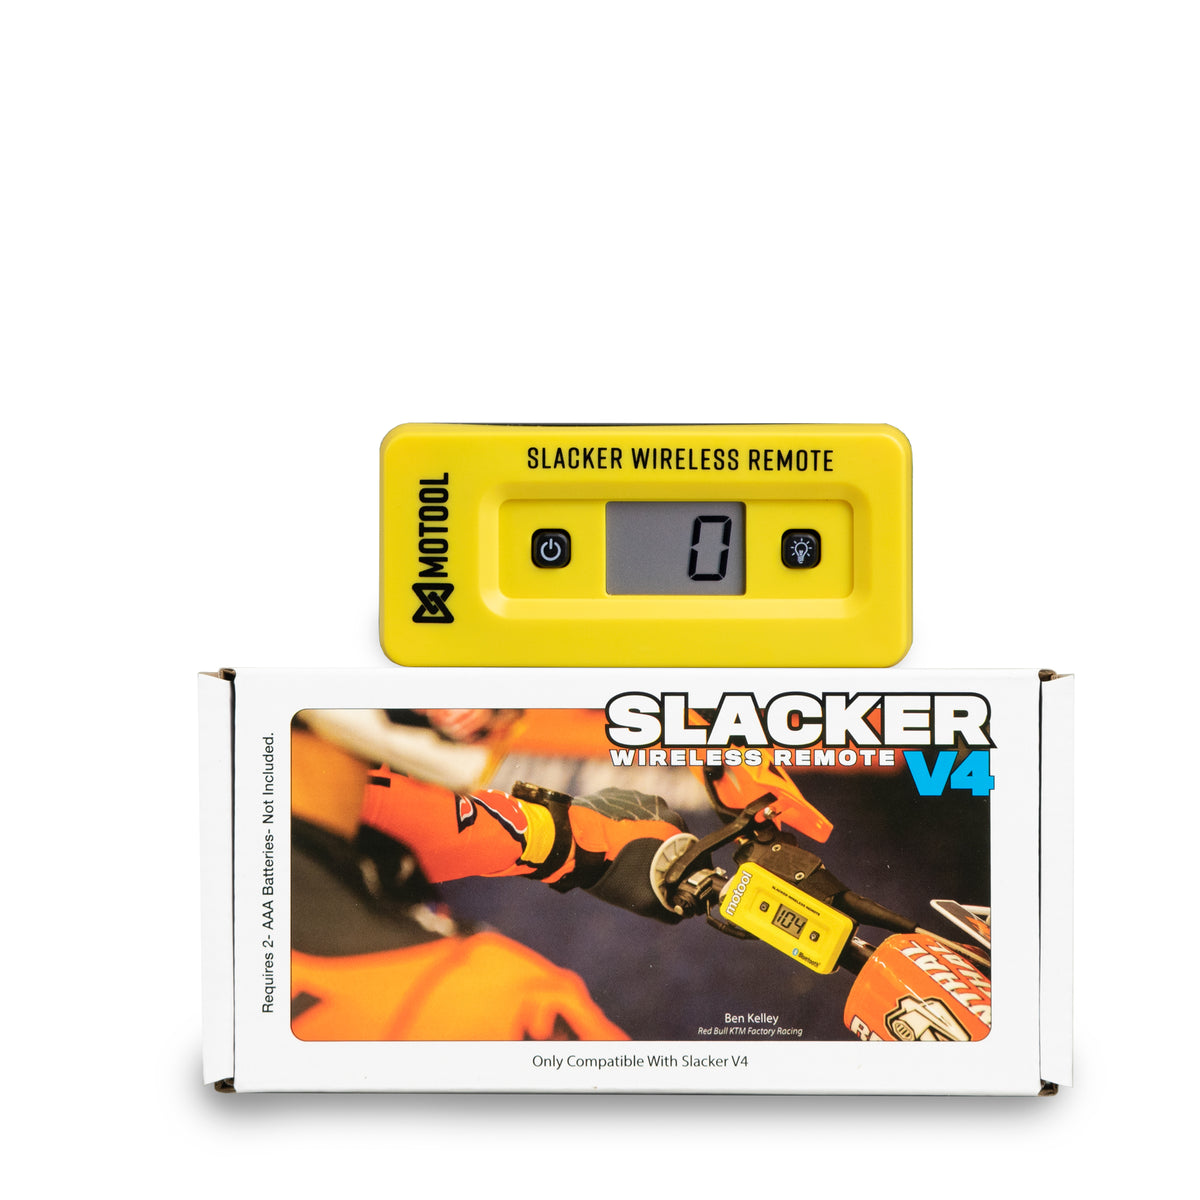 The Slacker wireless remote shows real-time sag measurements right on the bars.